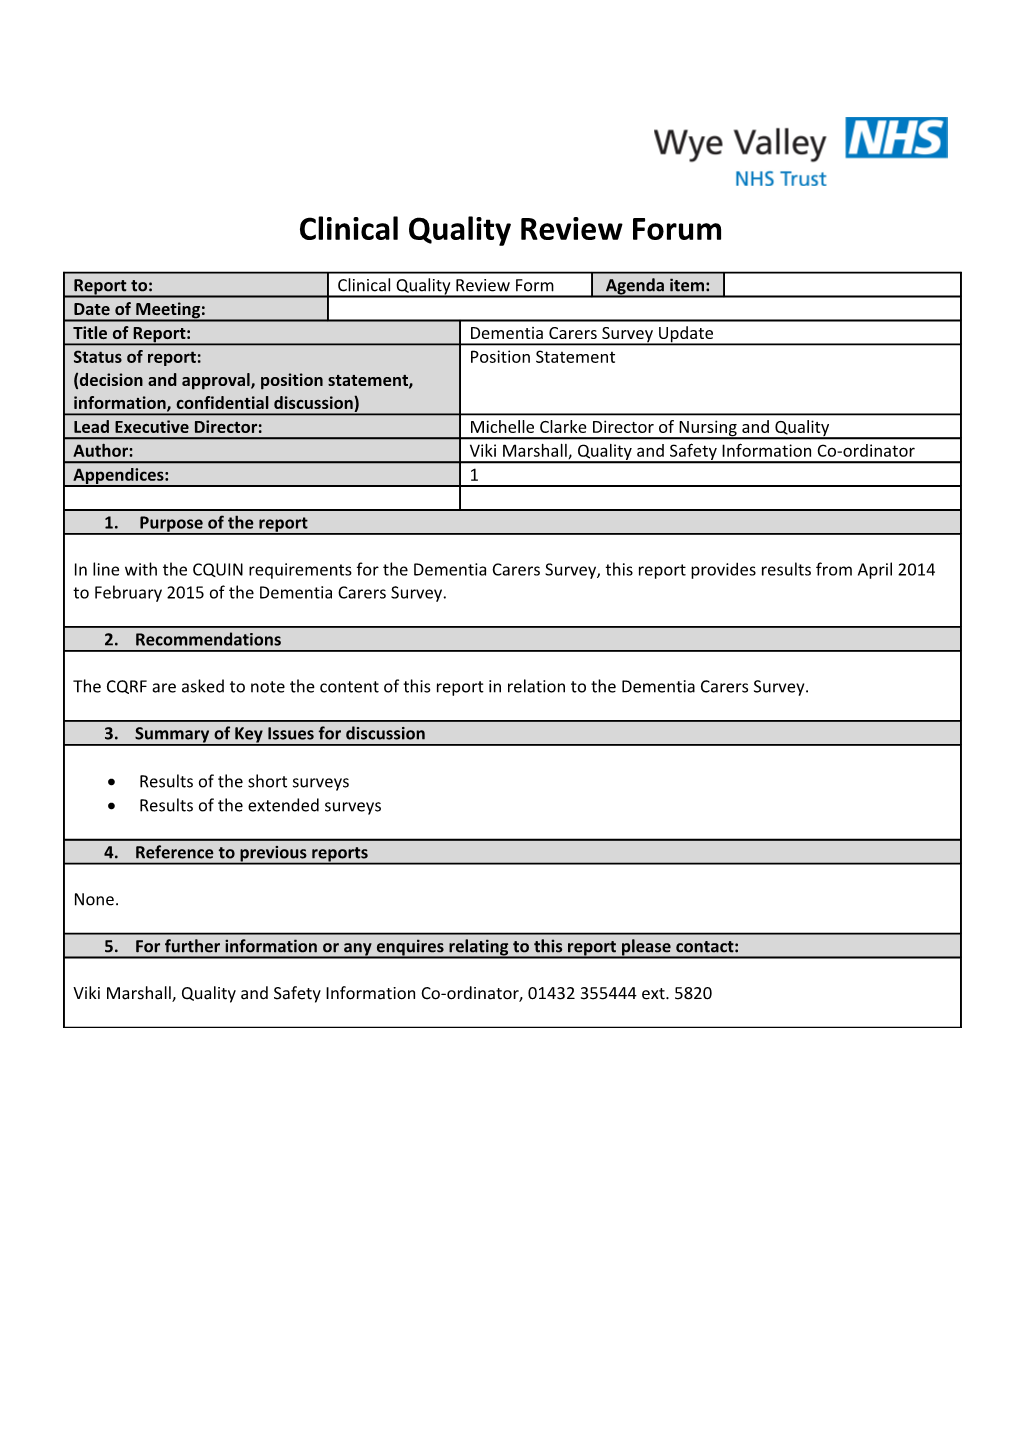 Clinical Quality Review Forum